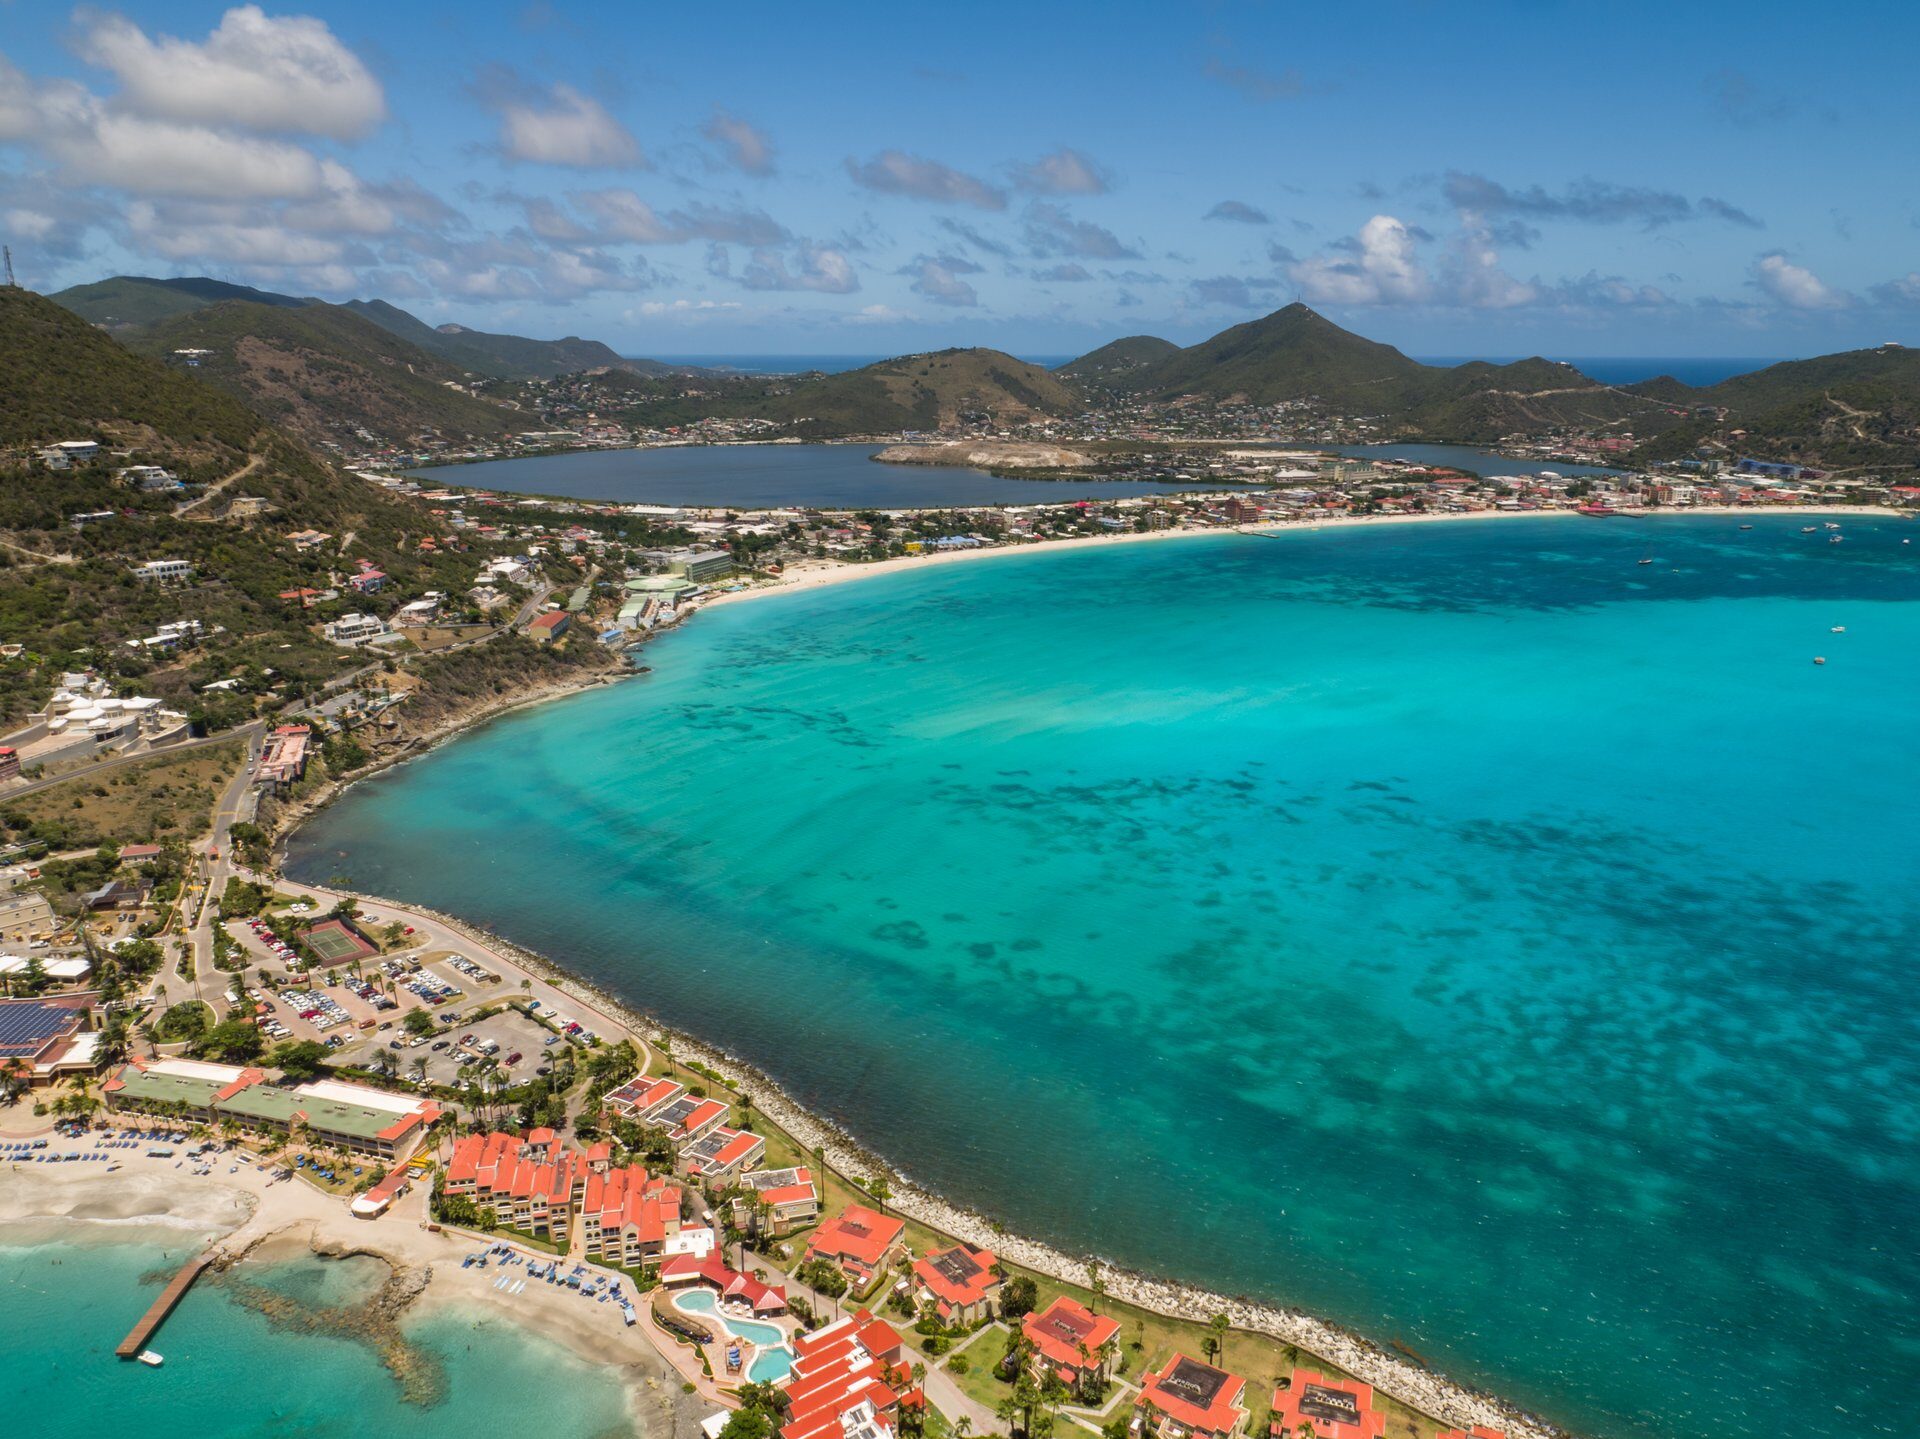 20 Best Things to Do in St. Maarten Celebrity Cruises